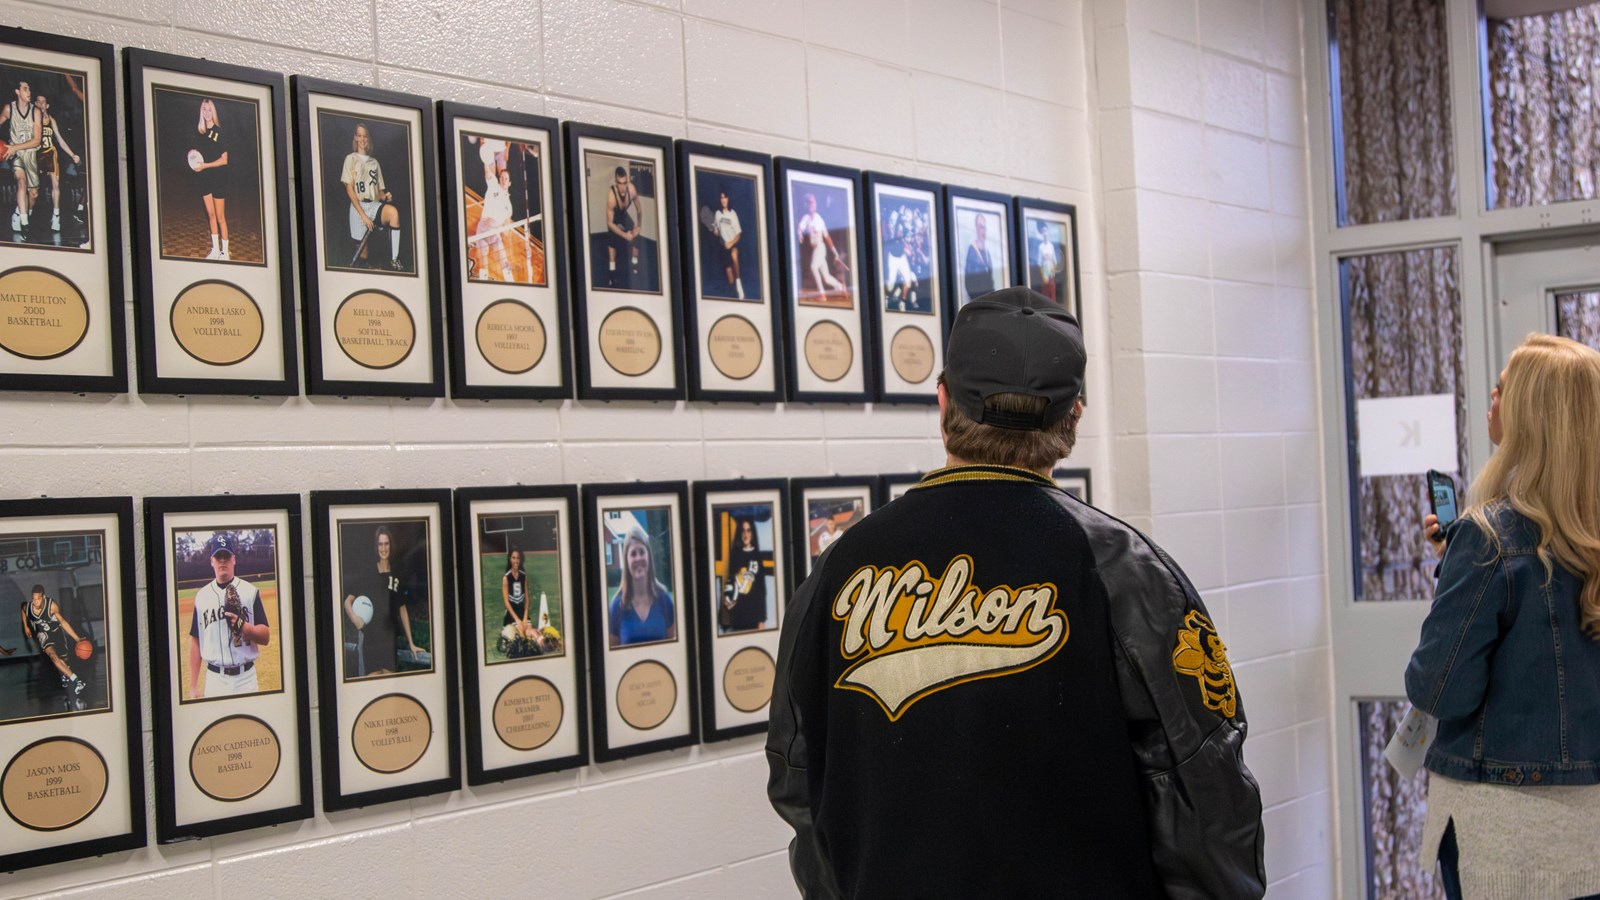 Sprayberry Alumni Stroll The Halls Filled With Memories Ahead Of Ed Splost Rebuild 